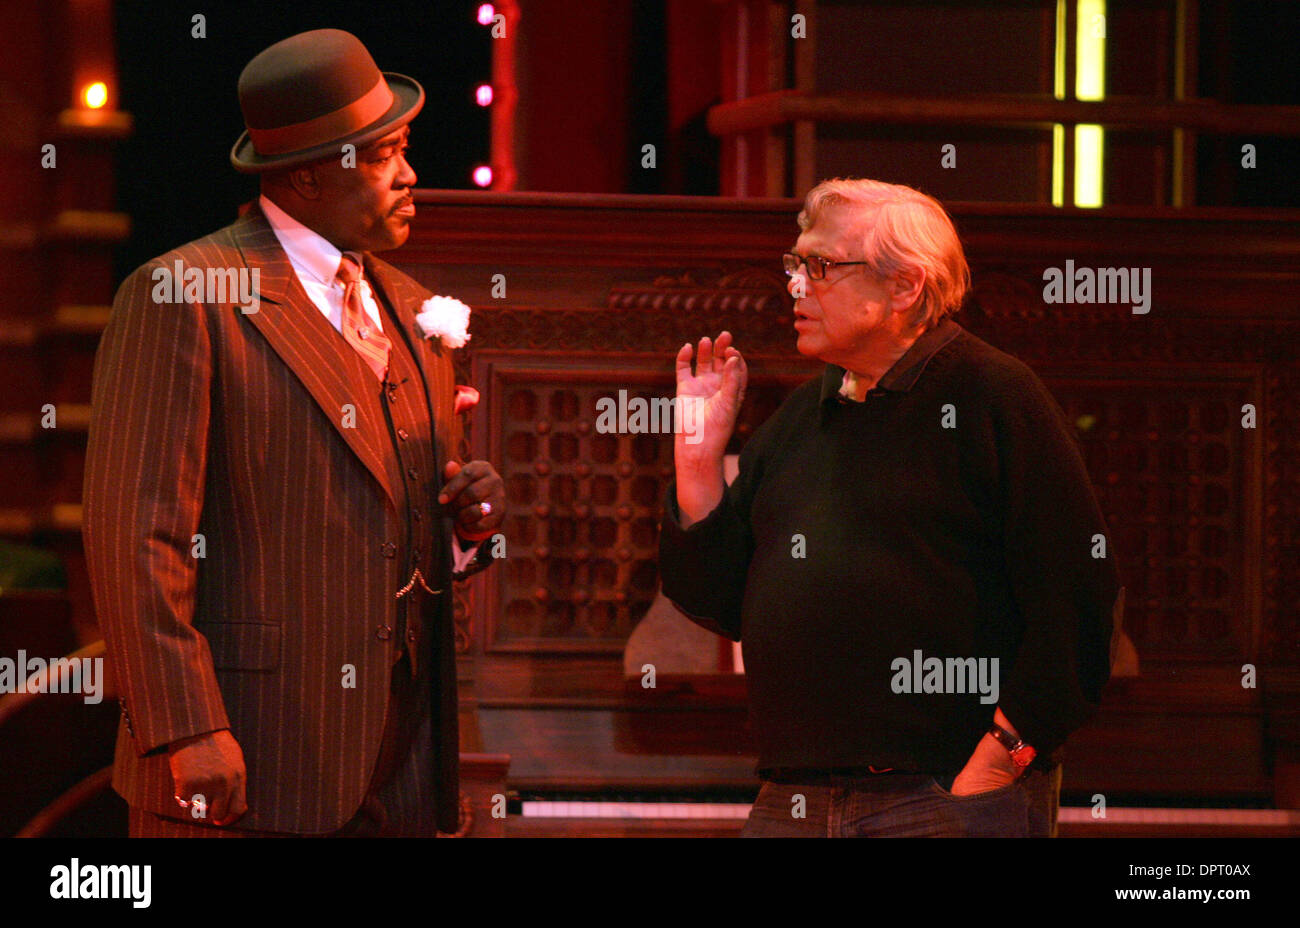 Apr 17, 2009 - Los Angeles, California, United States - Director RICHARD MALTBY(R) interacts with artist DOUG ESKEW on stage before a dress rehearsal for the musical show 'Ain't Misbeavin' at the Ahmanson Theatre. (Credit Image: © Ringo Chiu/ZUMA Press) Stock Photo